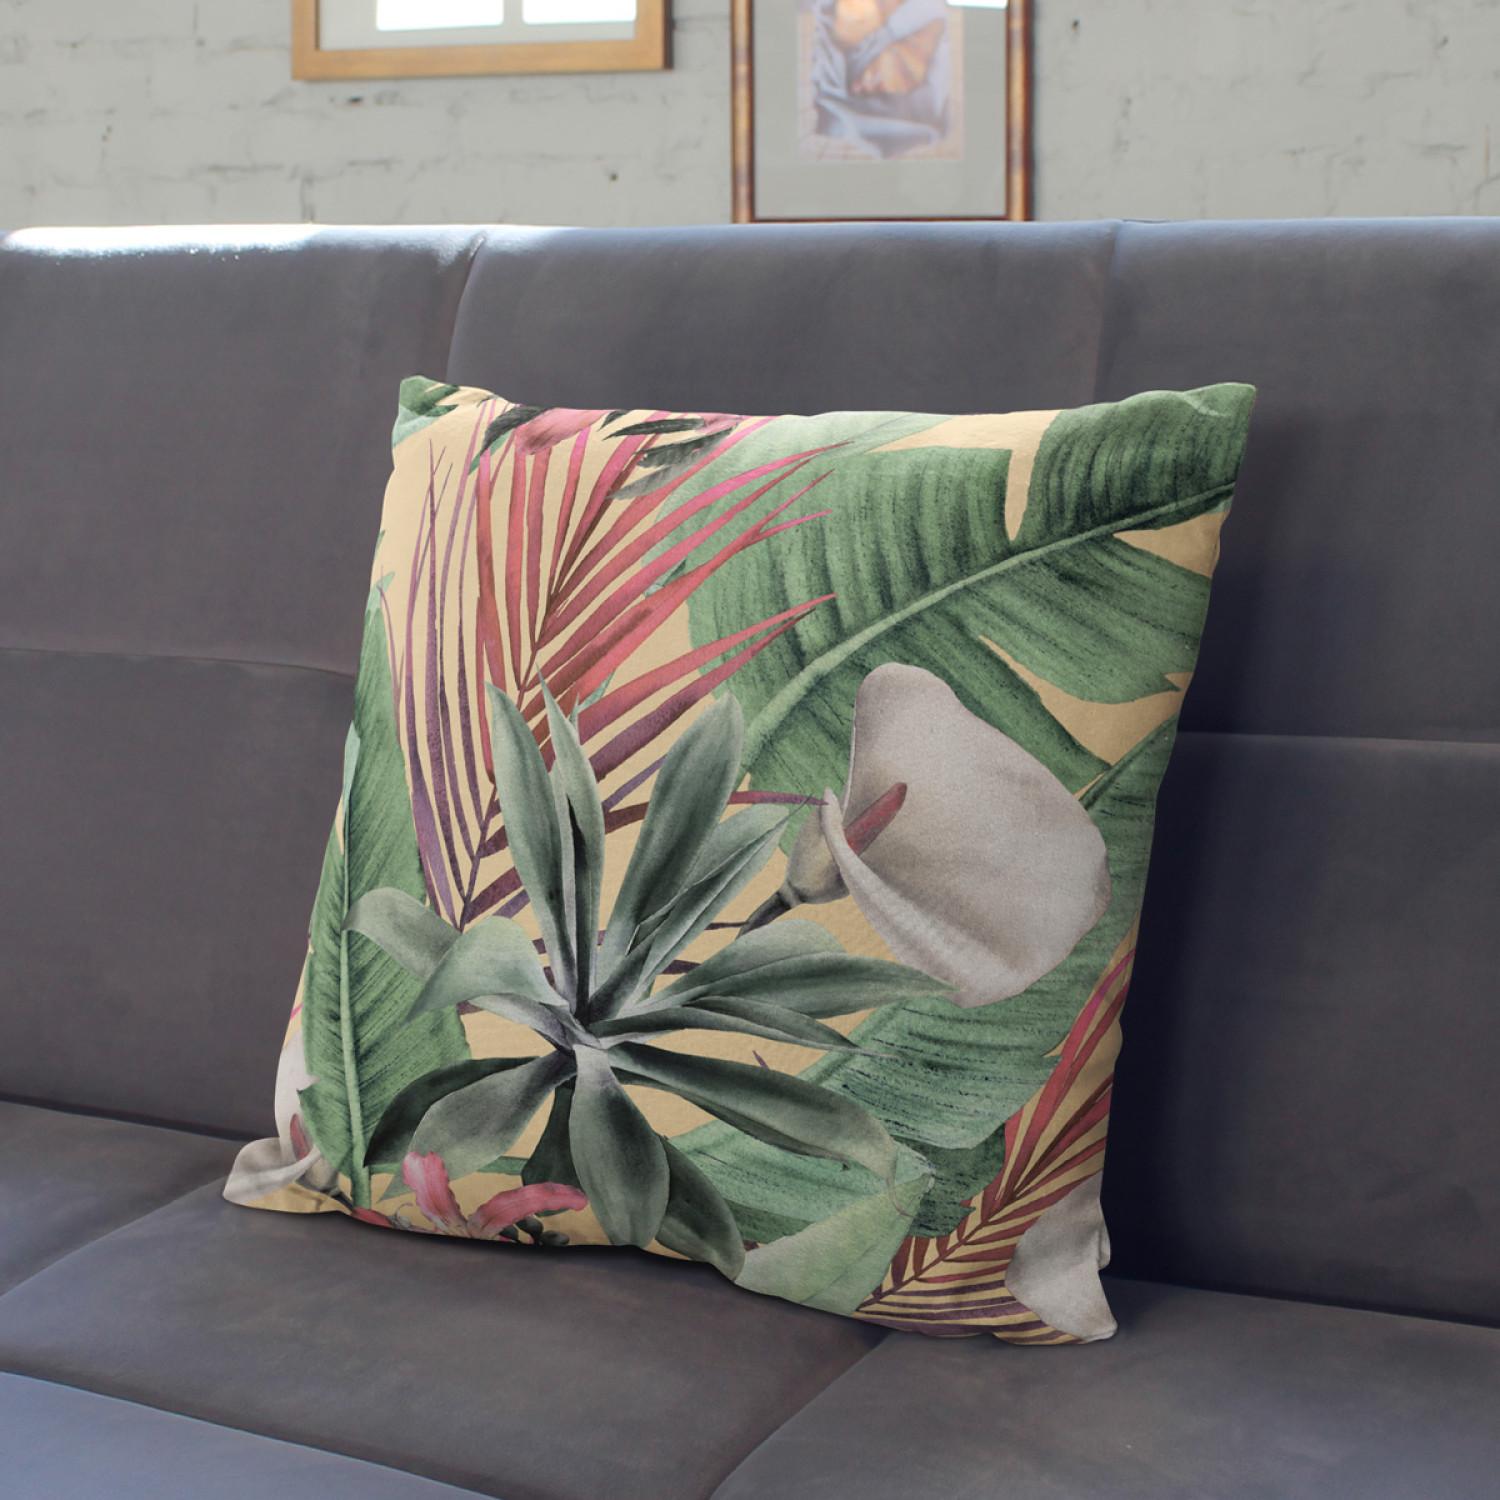 Decorative Microfiber Pillow Rainforest flora - a floral pattern with white flowers and leaves cushions